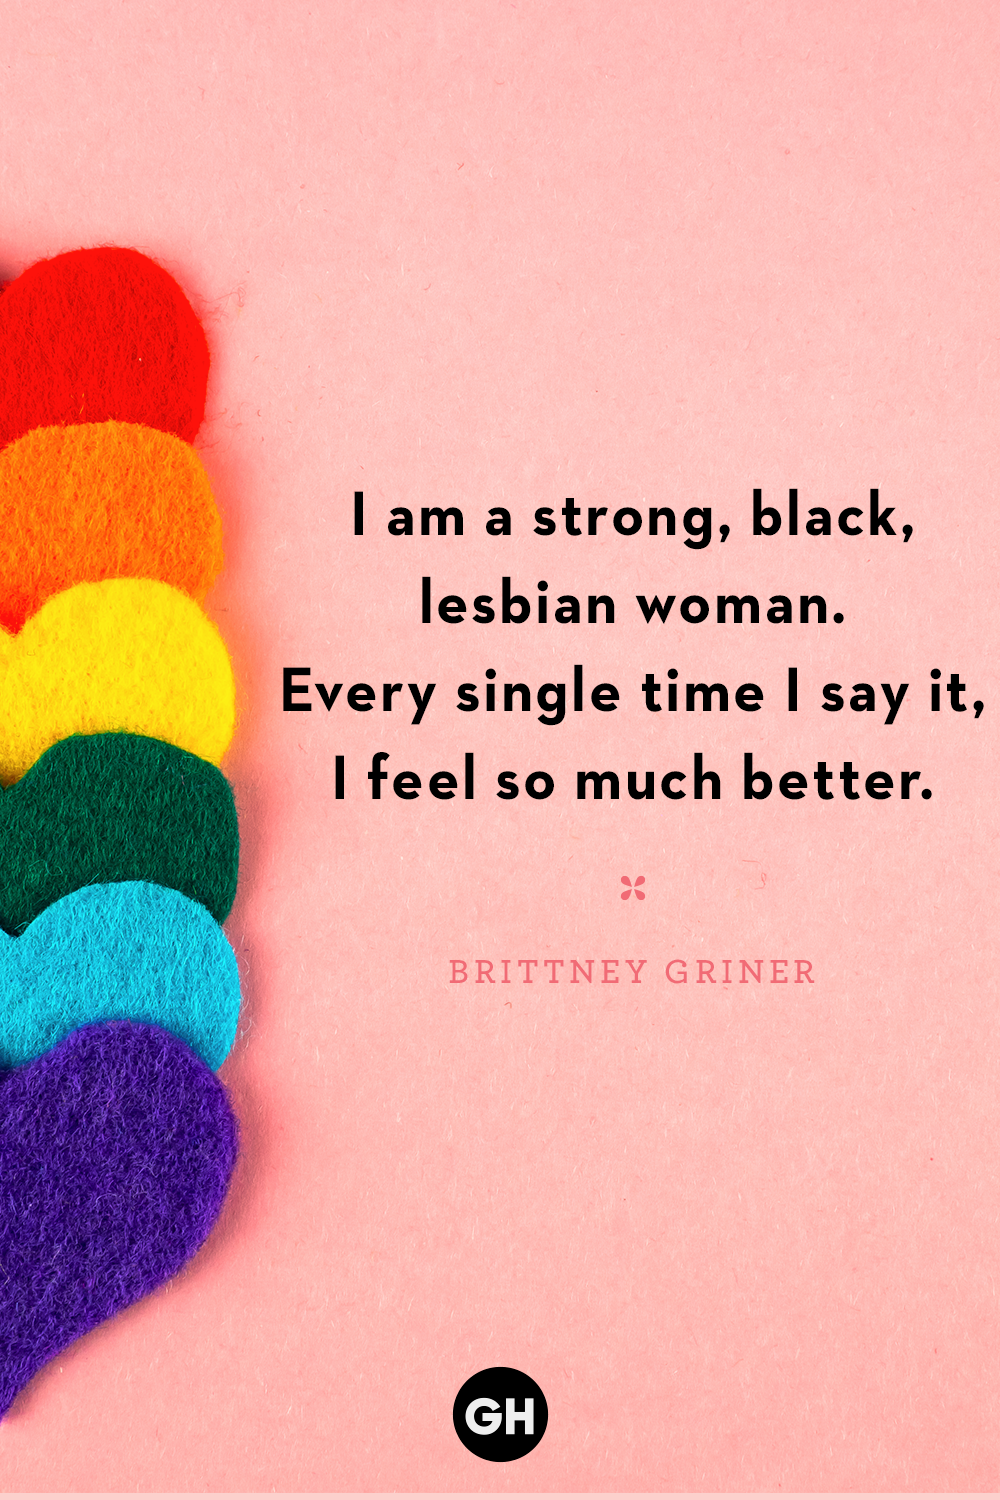 35 Inspirational Pride Month and LGBTQ+ Quotes and Caption Ideas